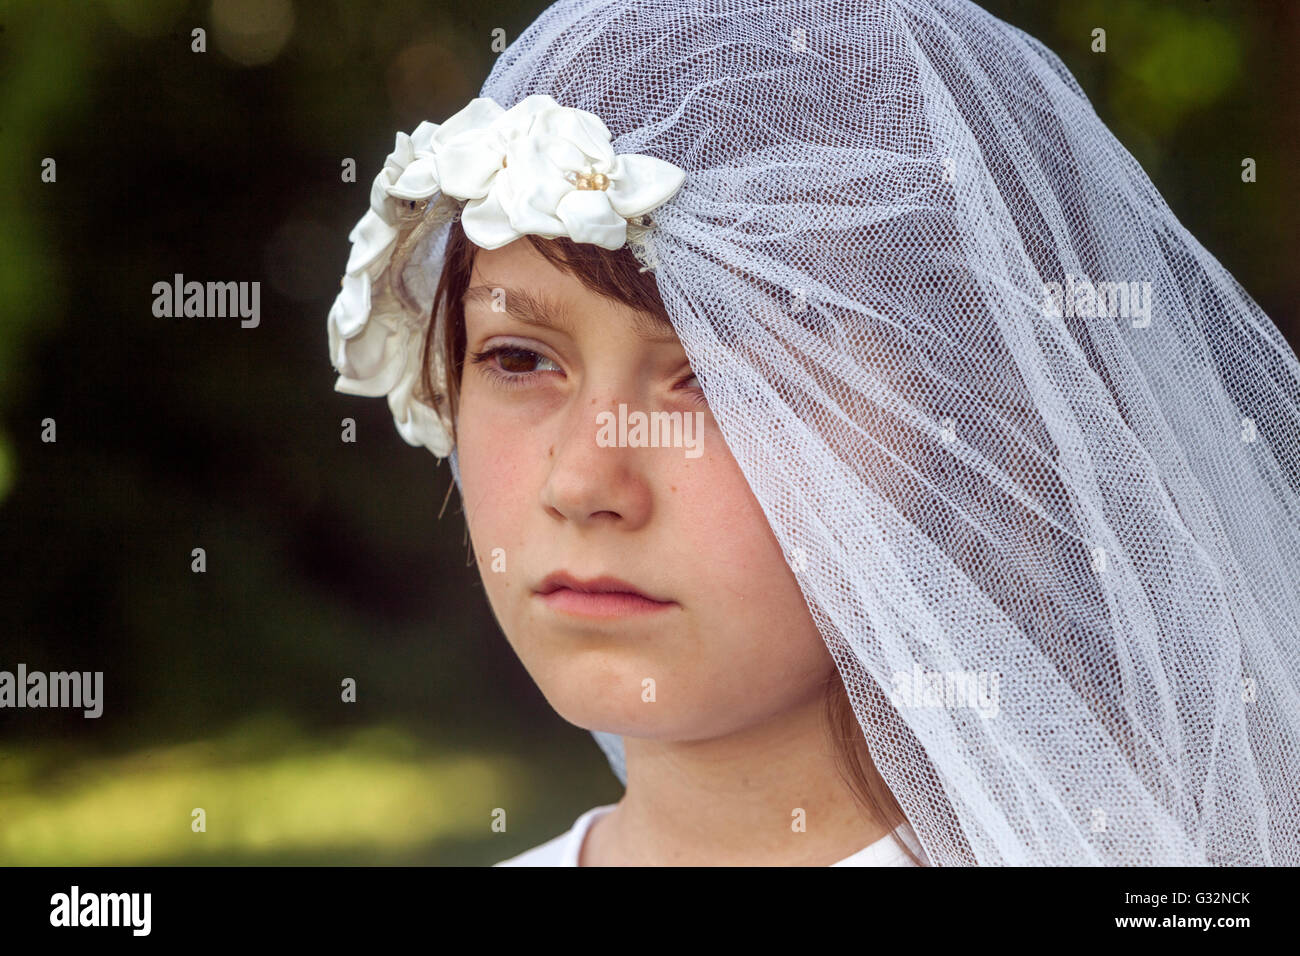 Age of Innocence 6-7 Years Old Girl White Bridal Veil Game Child Face Sad Expression Sad Girl Outside Kid Female Dressed Clothing Preteen Feeling Face Stock Photo